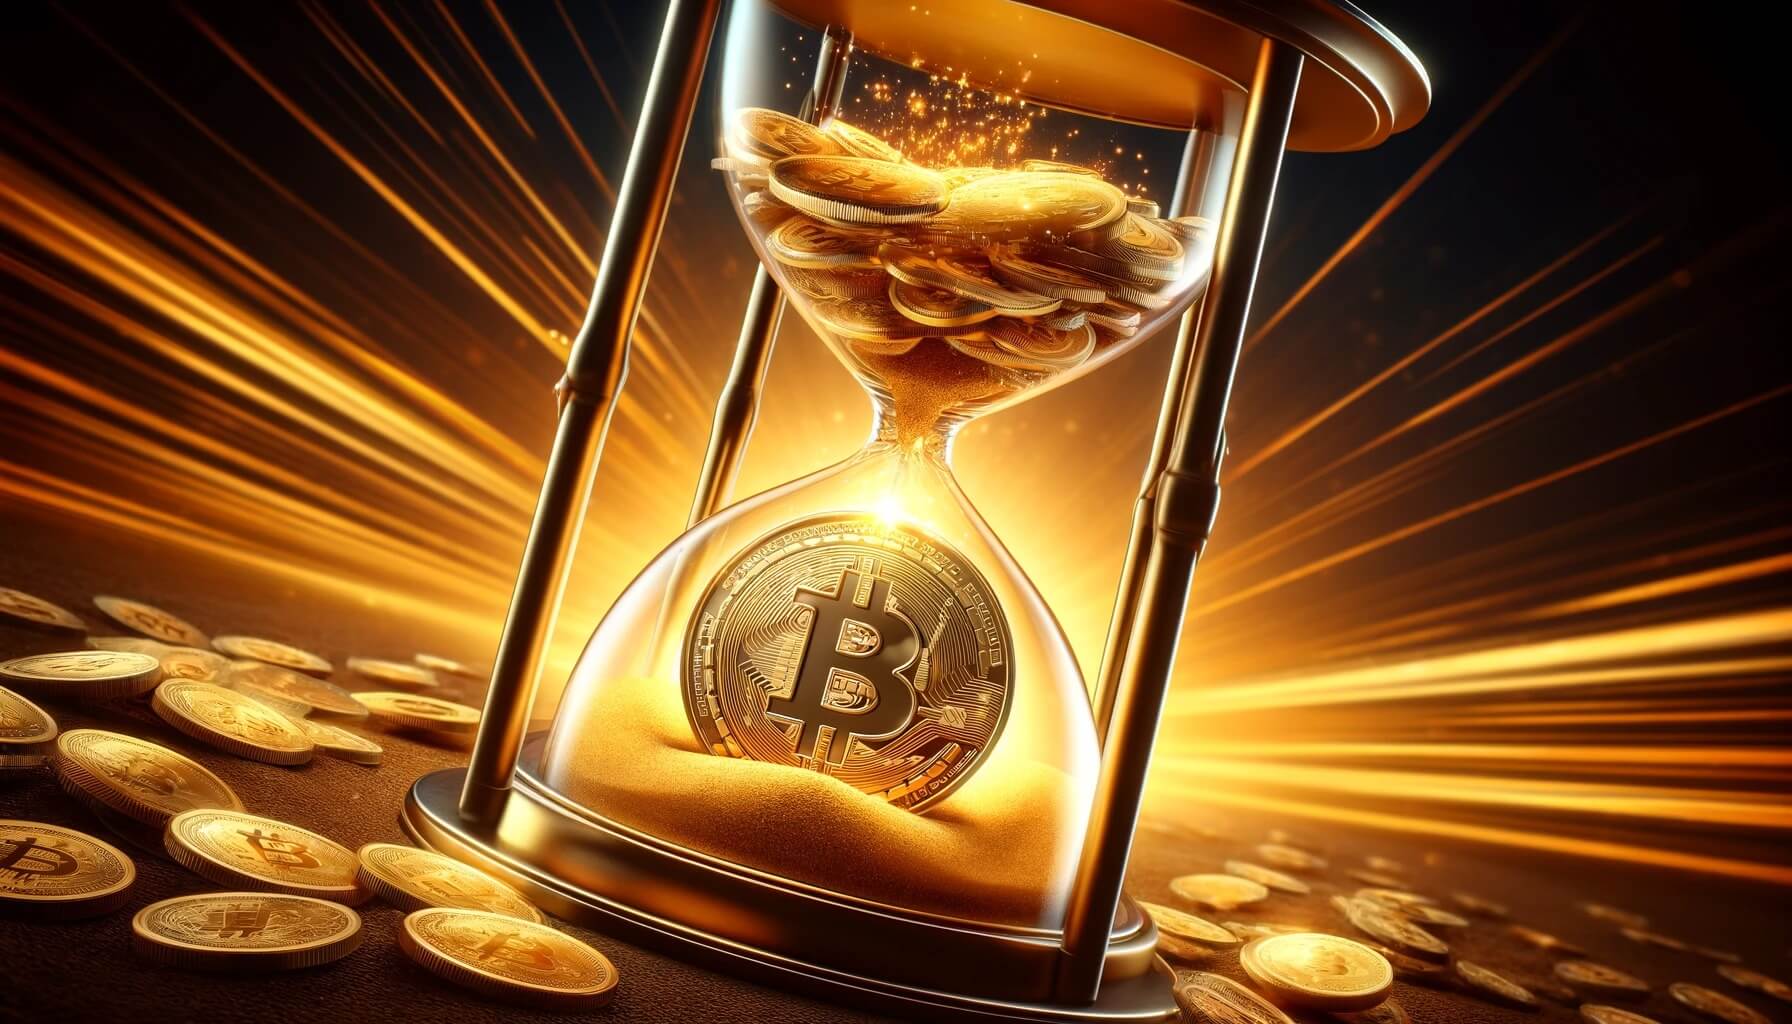 Bitcoin represented as a gleaming, golden coin embossed with the iconic Bitcoin symbol, passing through the narrow center of an hourglass